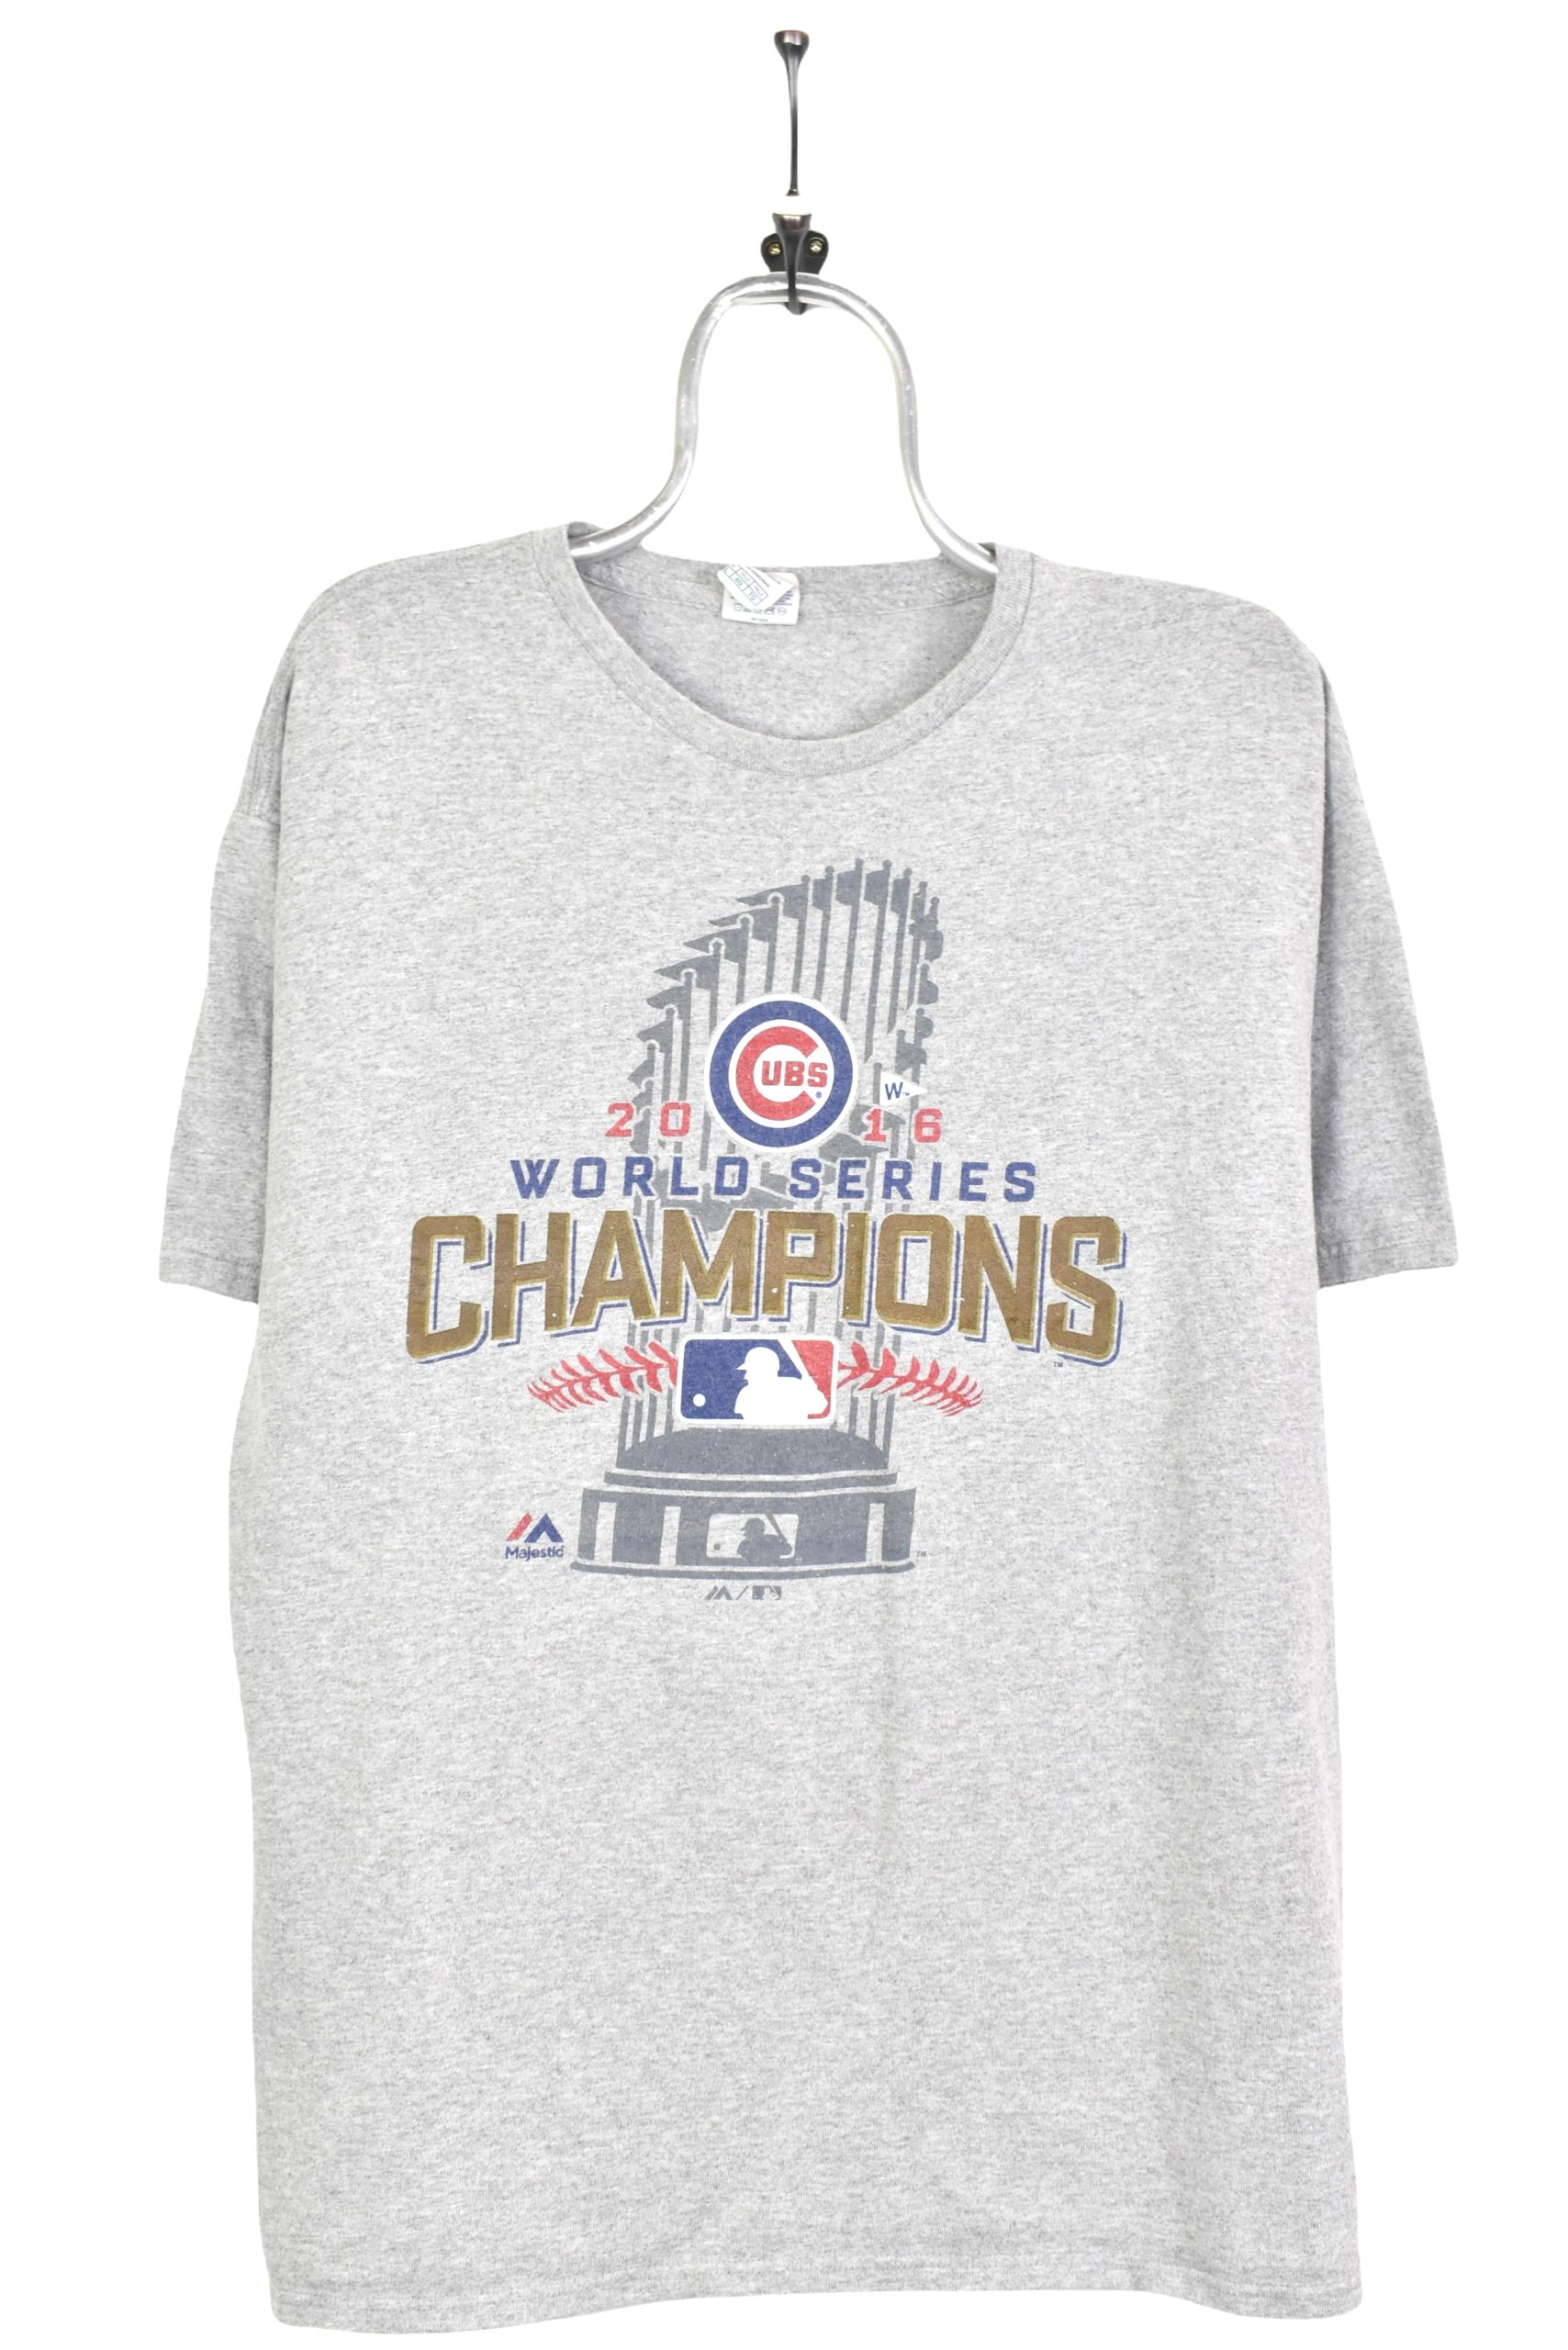 Majestic Chicago Cubs 2016 World Series Champions Black Graphic T-Shirt  Large